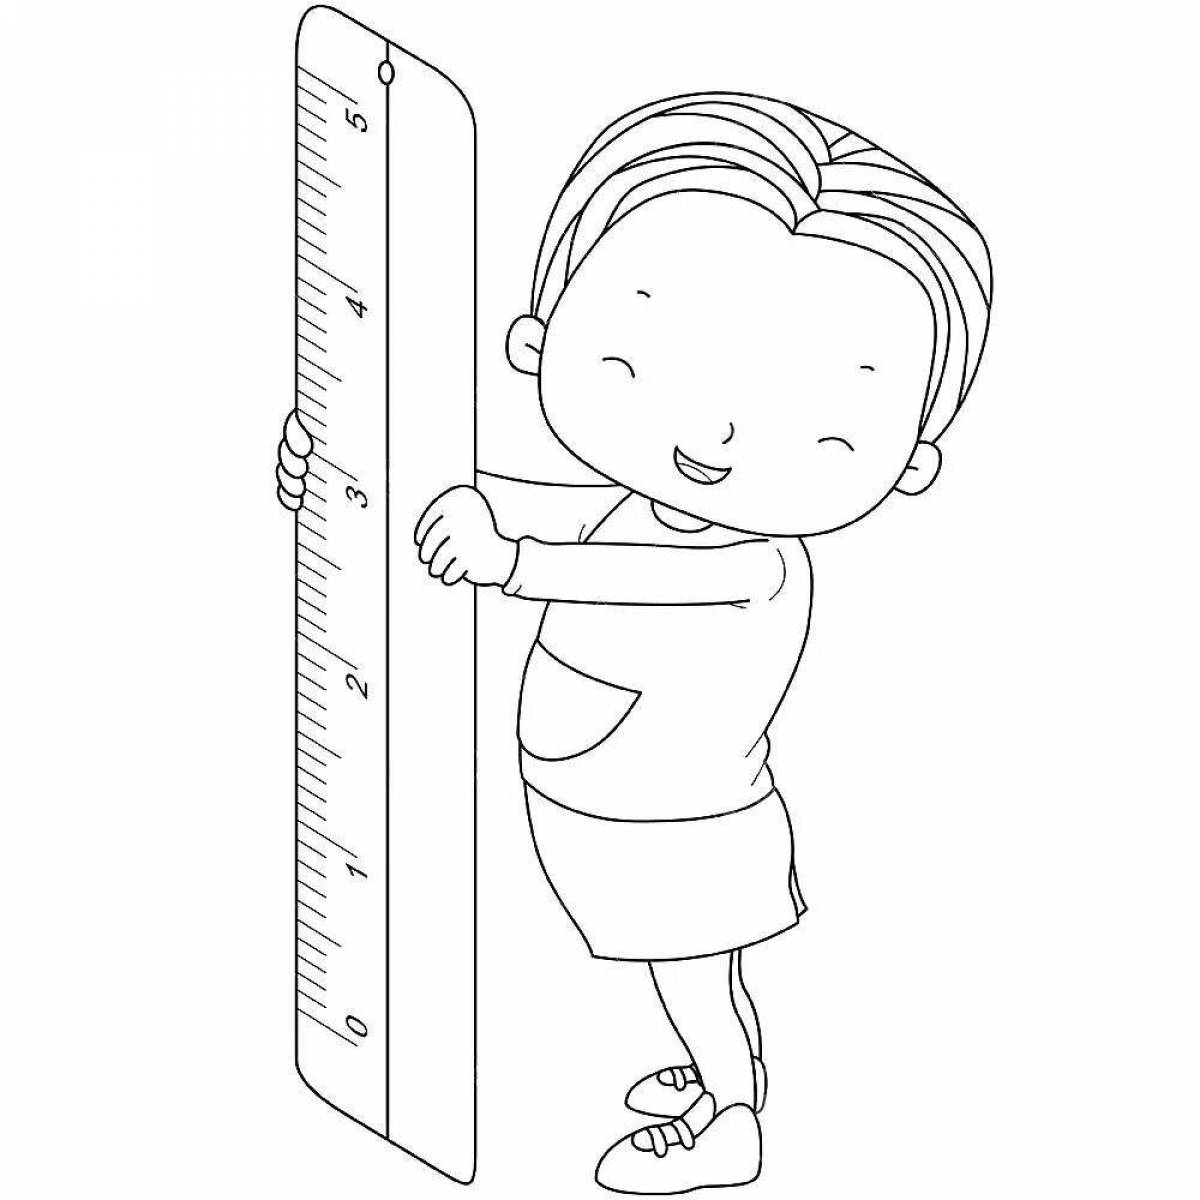 Playful baby ruler coloring page